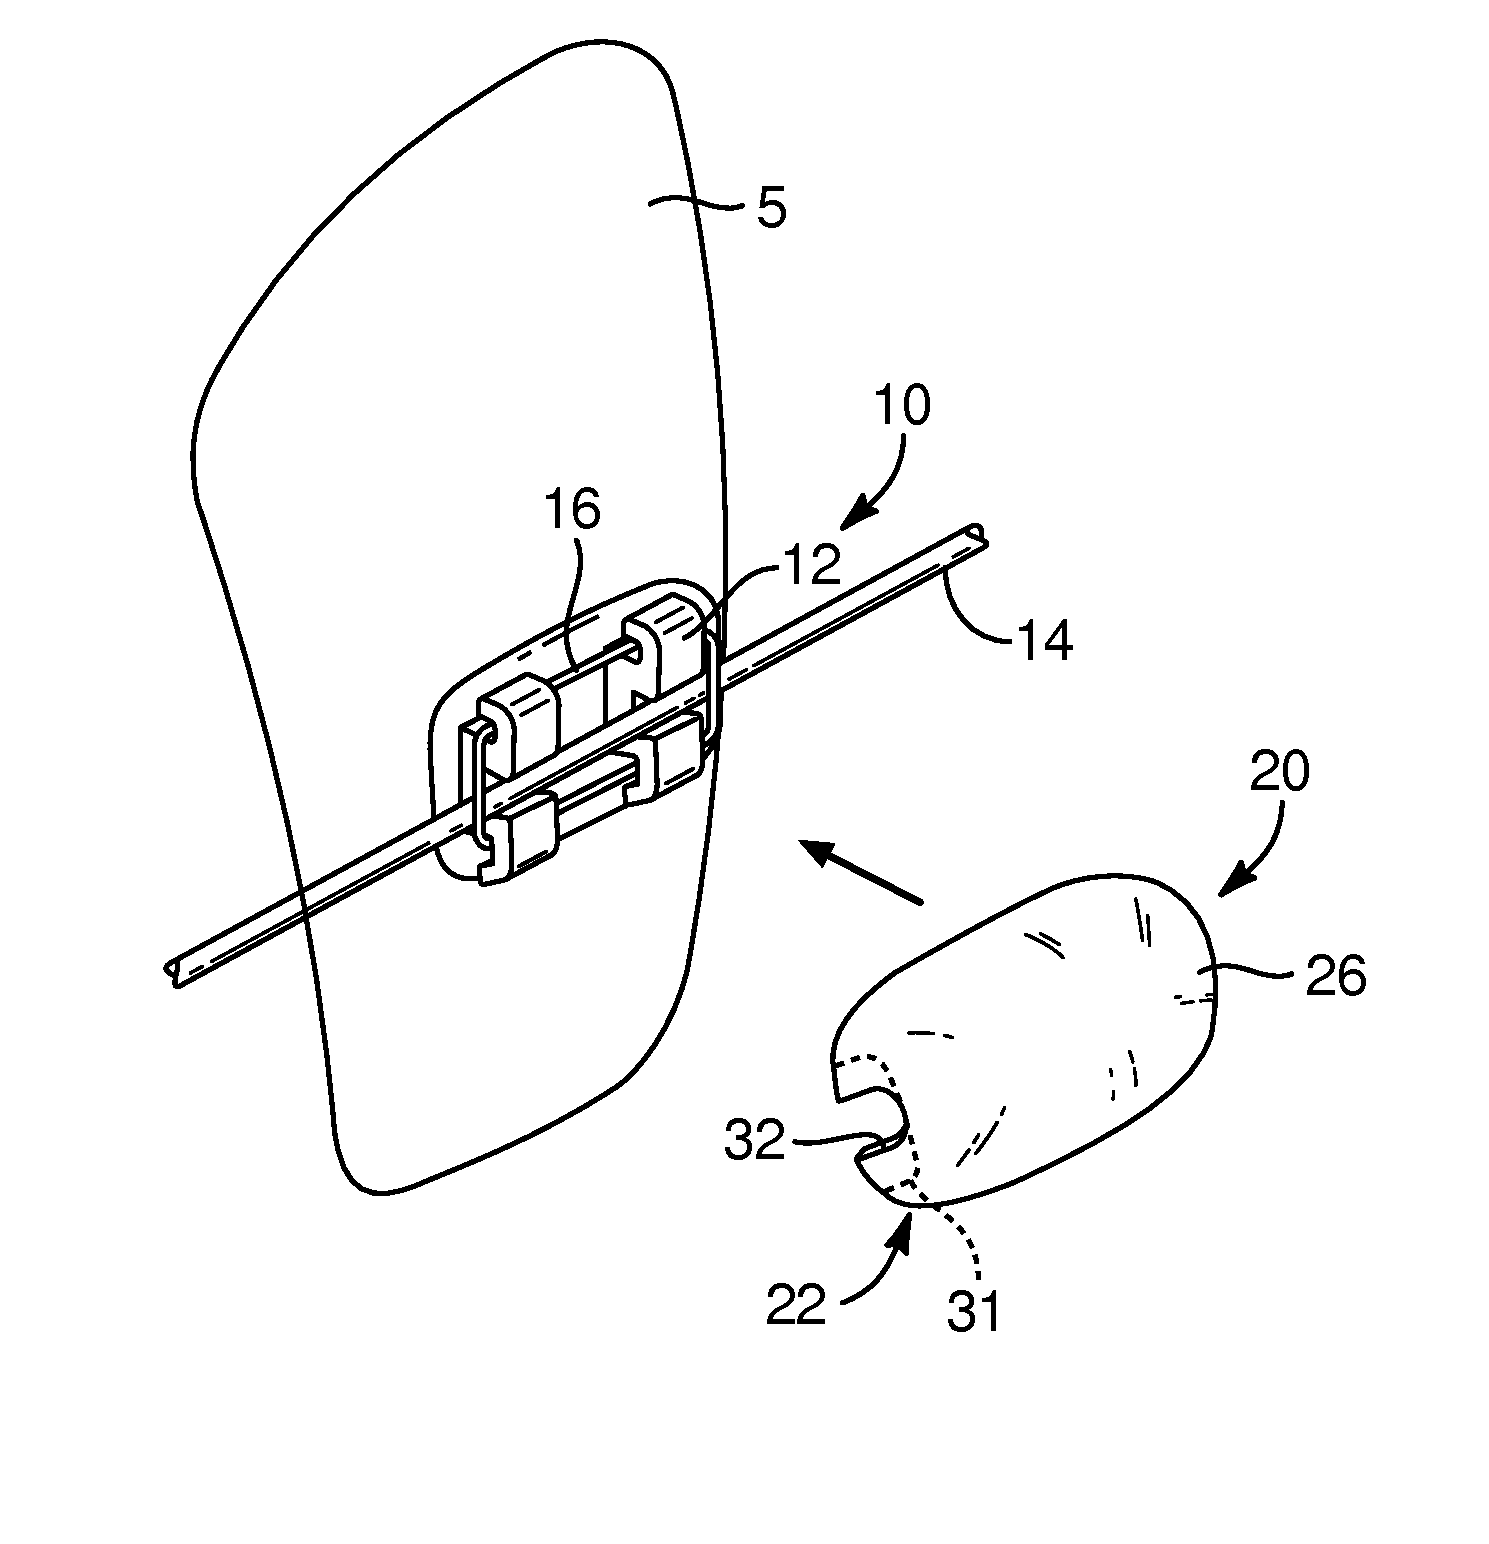 Devices, systems, and methods for orthodontic hardware